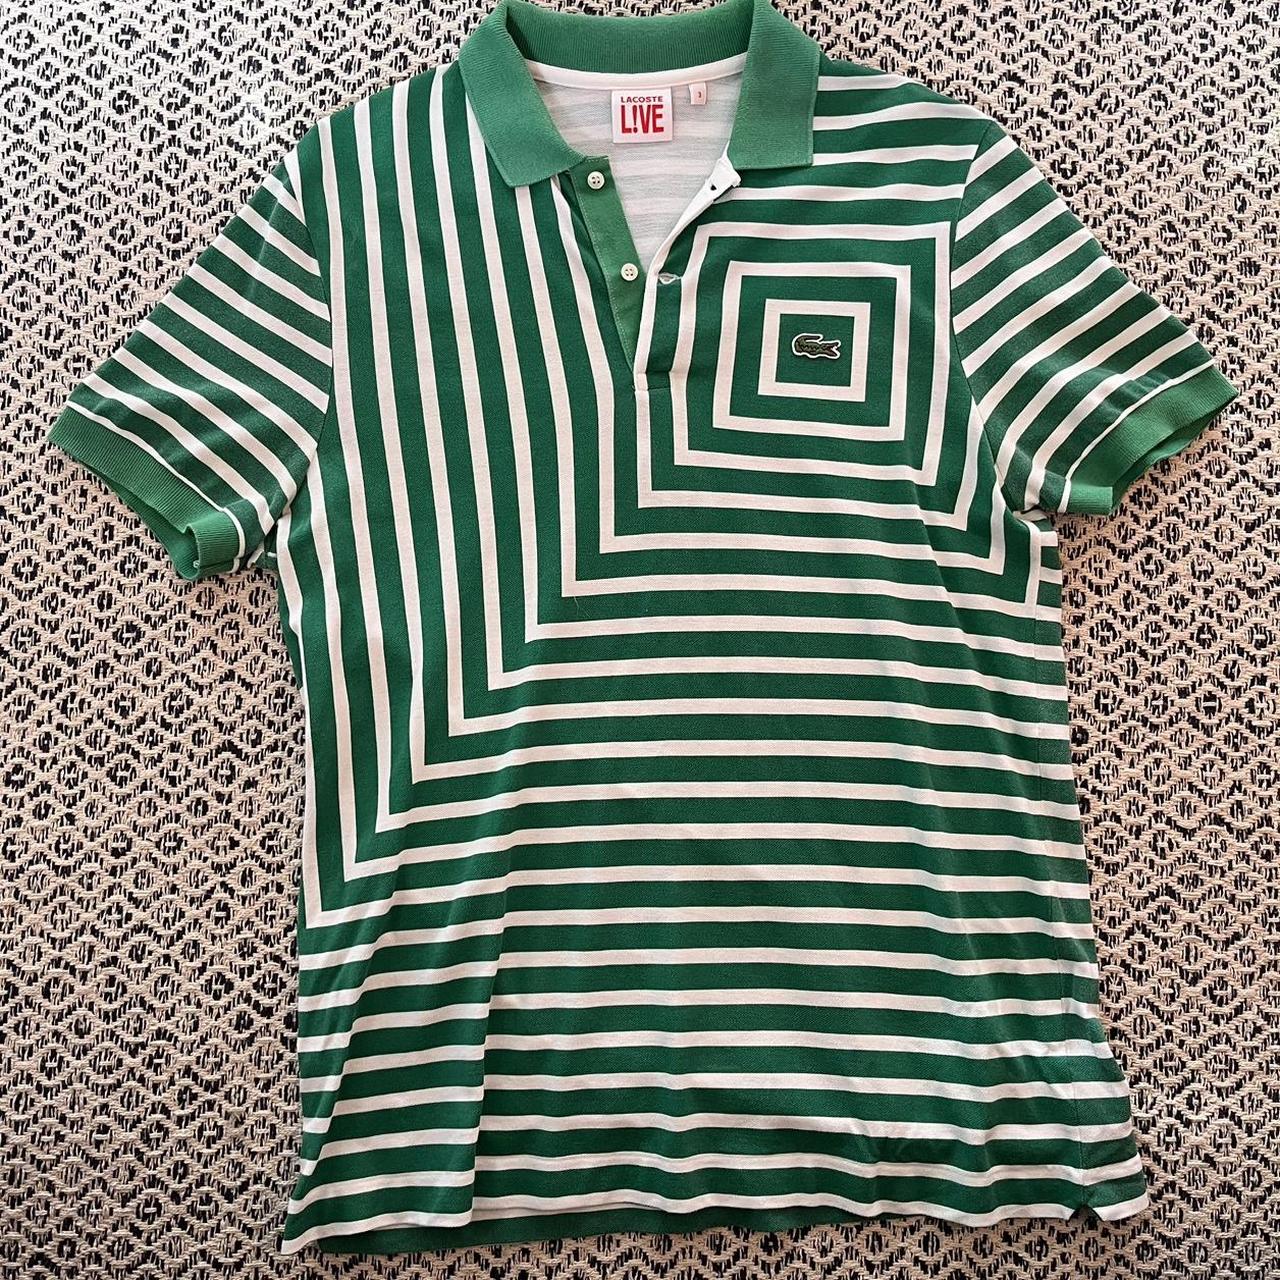 Lacoste Live Men's Green and White Polo-shirts | Depop